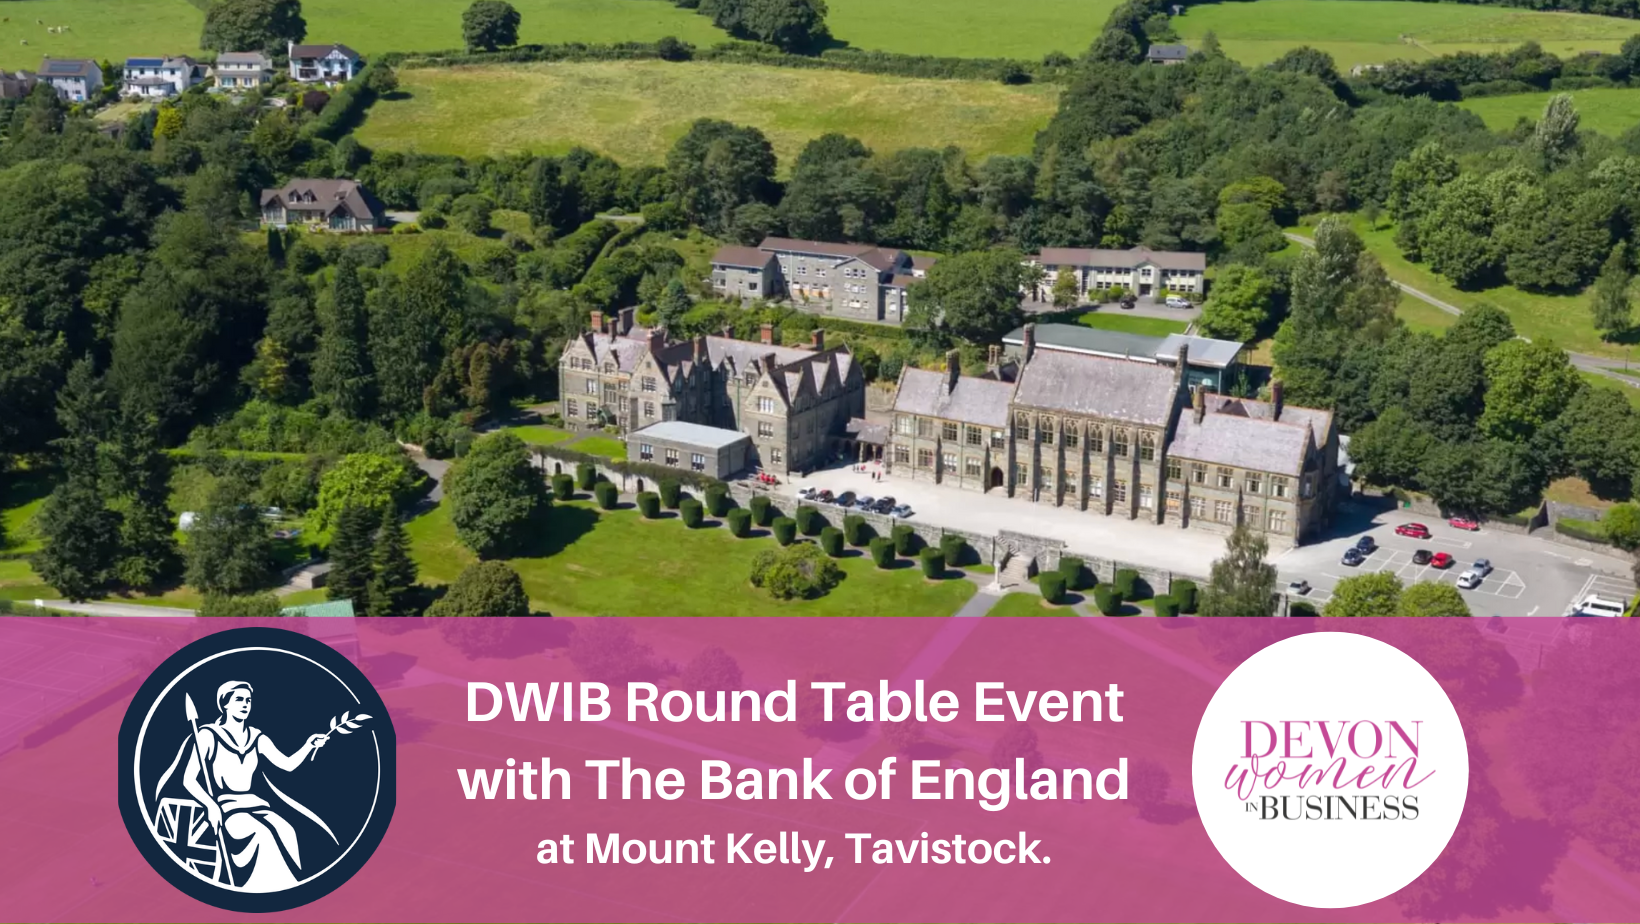 Aerial photo of the College at Mount Kelly in Tavistock. Pink banner overlays the lower third of the image. The Bank of England logo and the Devon Women in Business logo are on the banner, either side of the text: DWIB Round Table Event with The Bank of England at Mount Kelly, Tavistock.